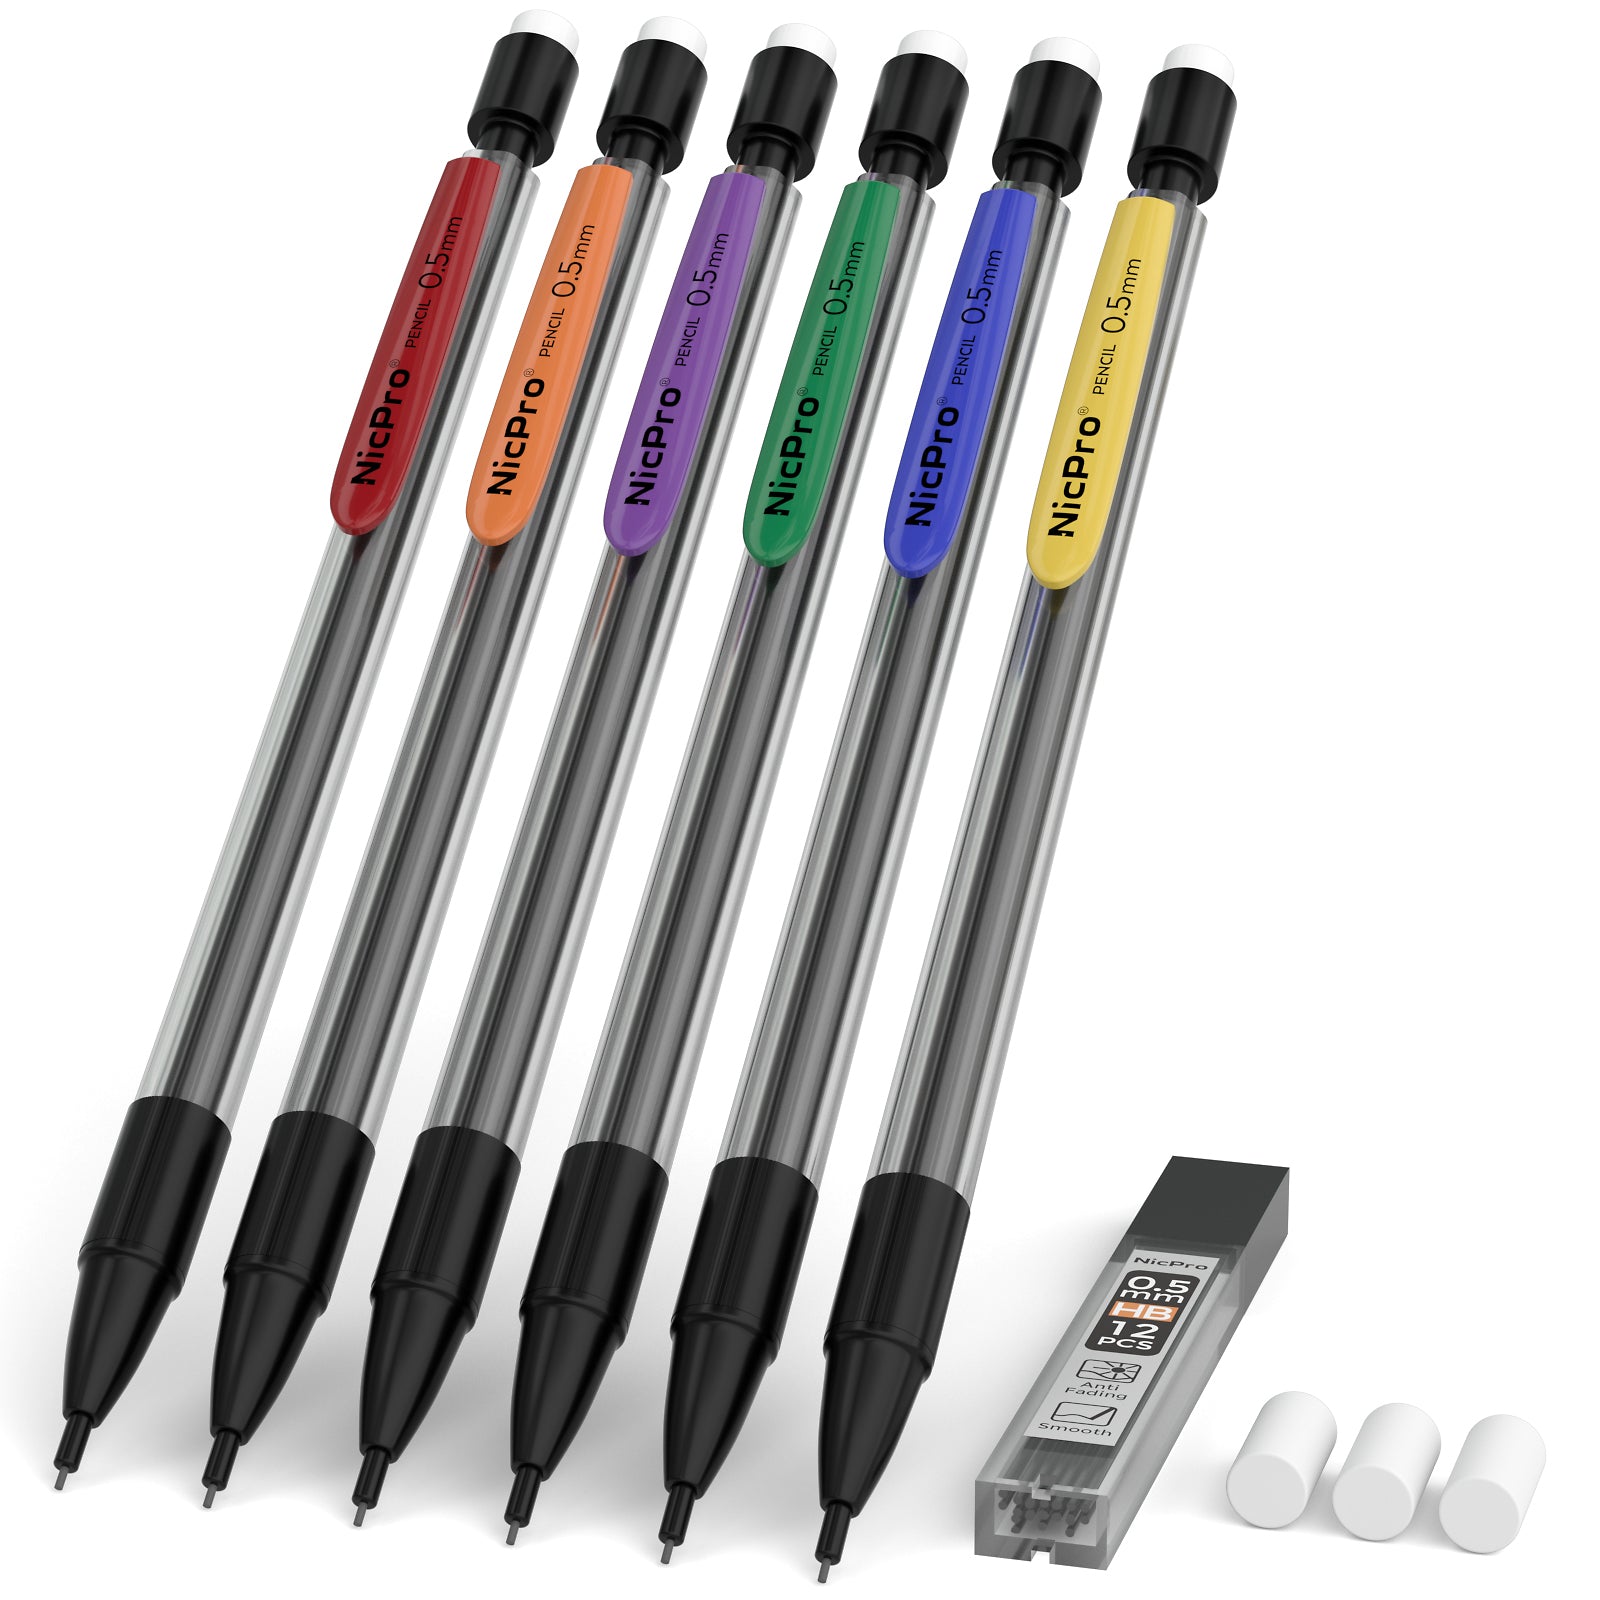 Nicpro 6 PCS 0.5 mm Mechanical Pencil Set, Color Pencil Clips Design Drafting Pencil with HB Lead Refills, 3 Eraser Refills for Student Writing, Drawing, Sketching